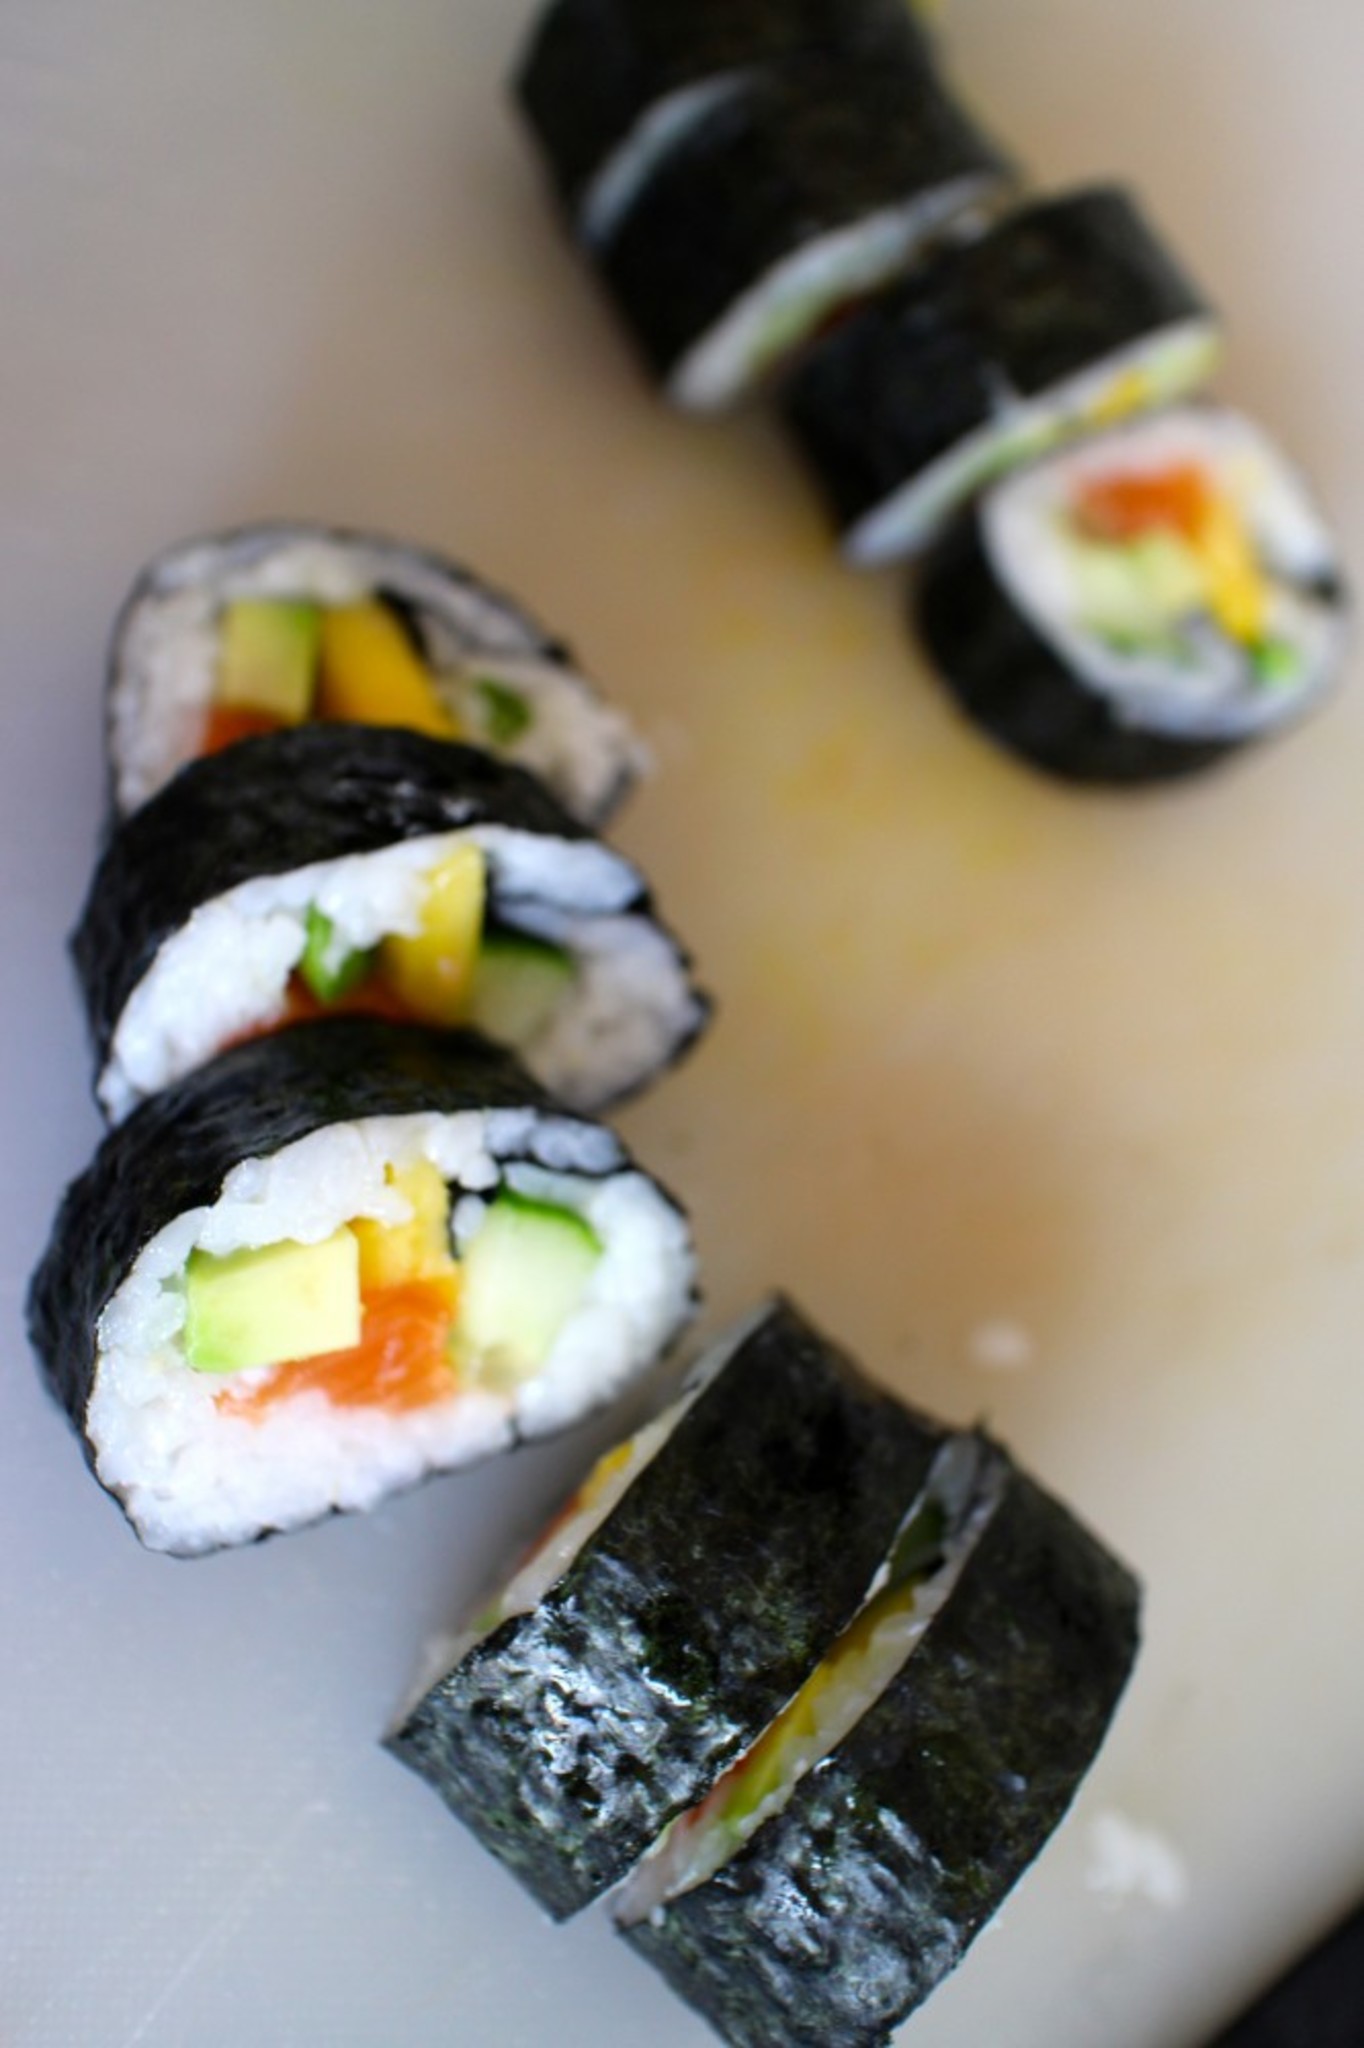 And Done!  Here you have  Salmon Maki with cucumber and mango.  You can add any kind of roe  and sesame seeds. 